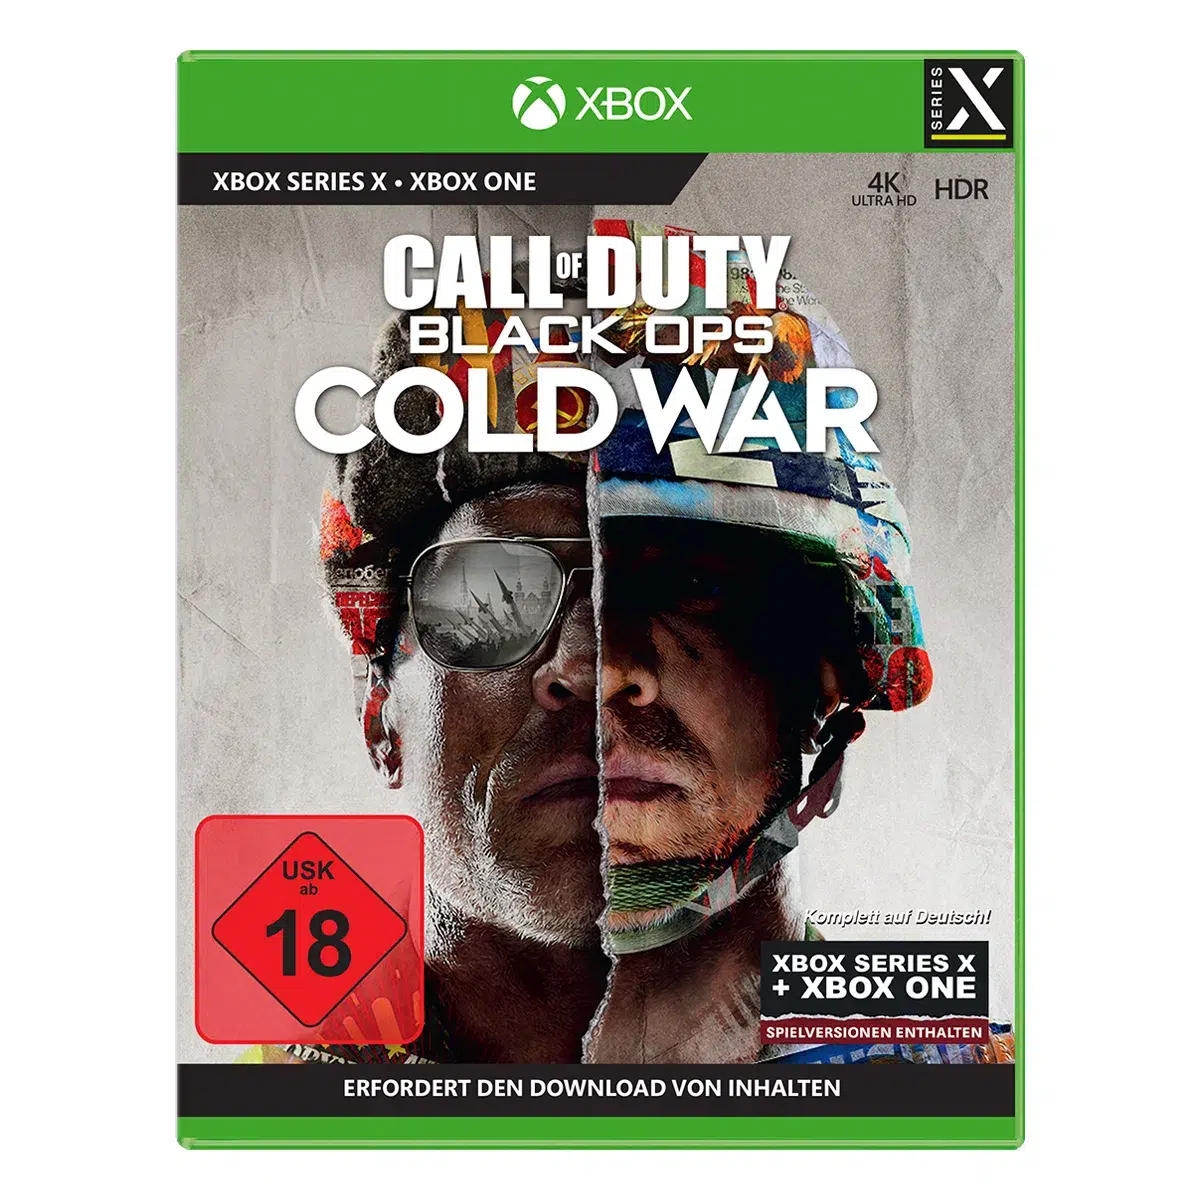 Call of Duty: Black Ops - Cold War (XSRX)